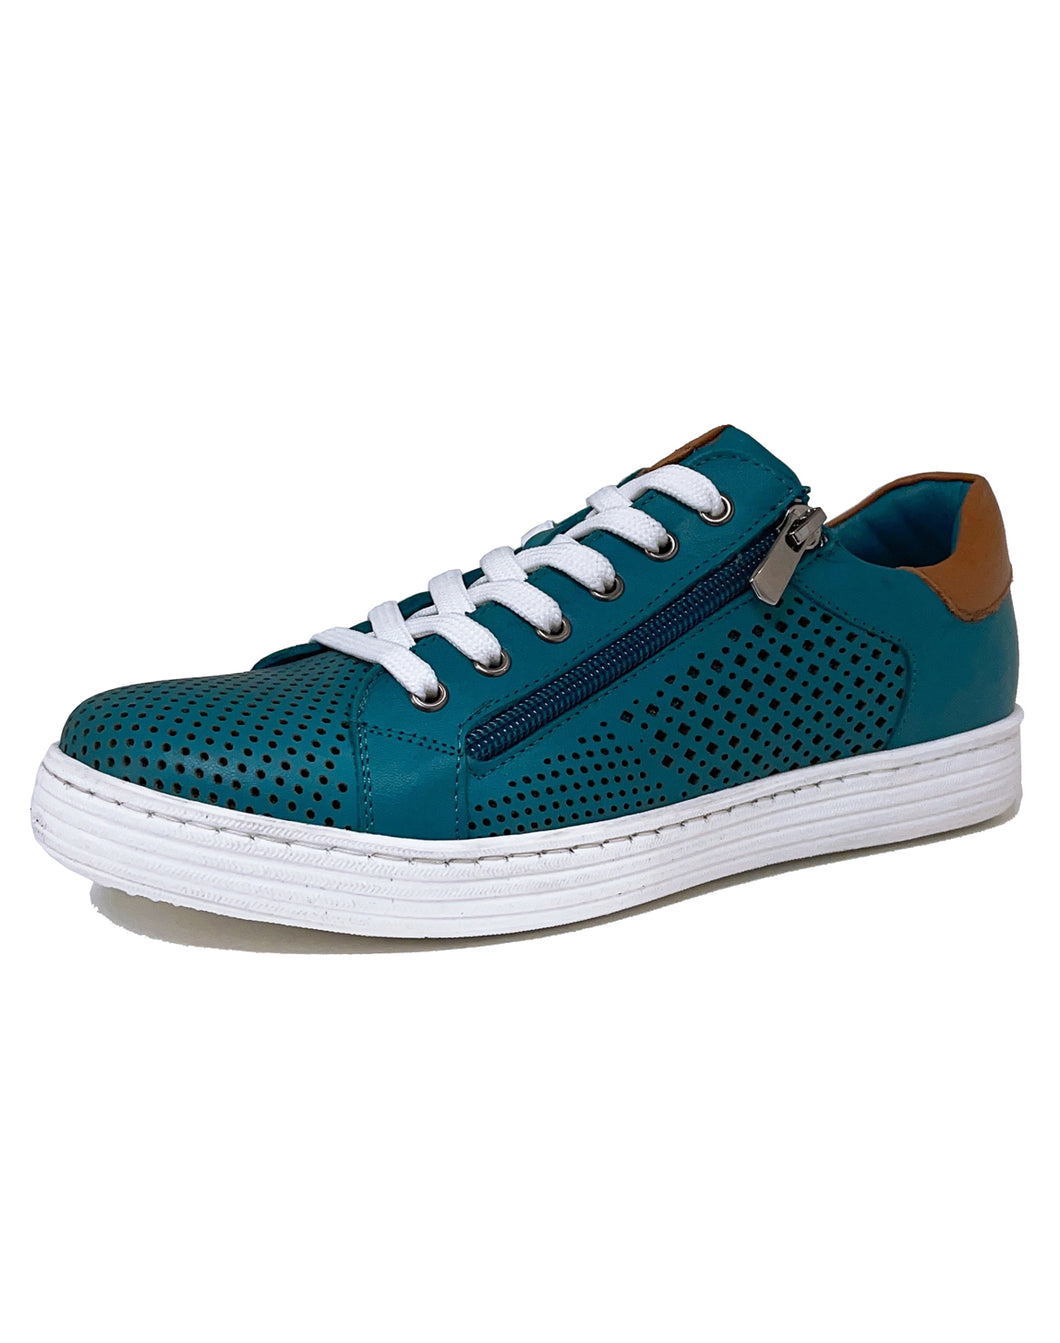 CABELLO UNIVERSE PERFORATED SHOE- PETROL